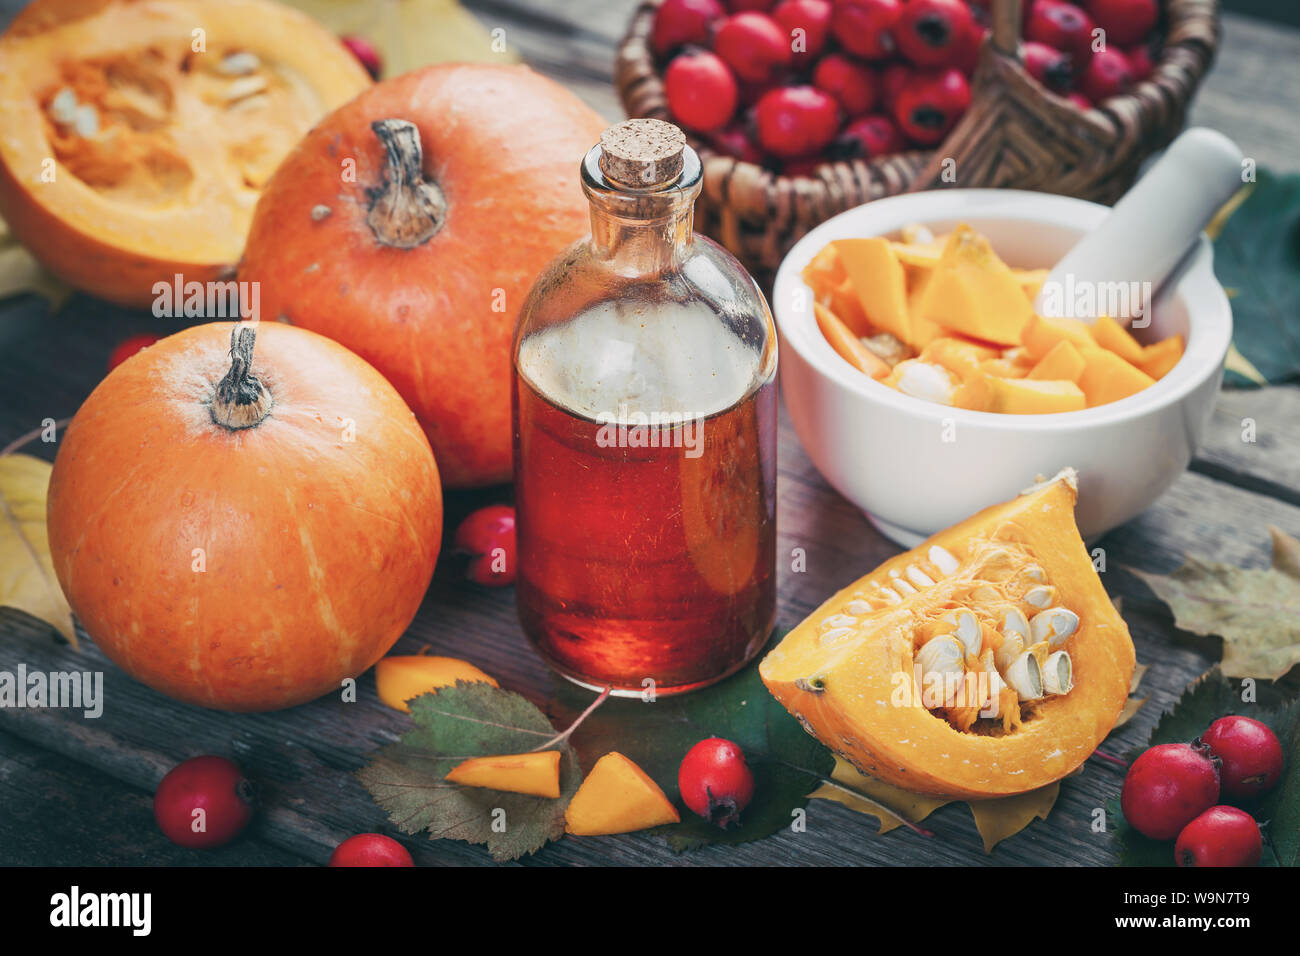 Pumpkin seeds oil bottle, pumpkins, mortar and basket of  hawthorn berries on wooden table with autumn leaves. Stock Photo